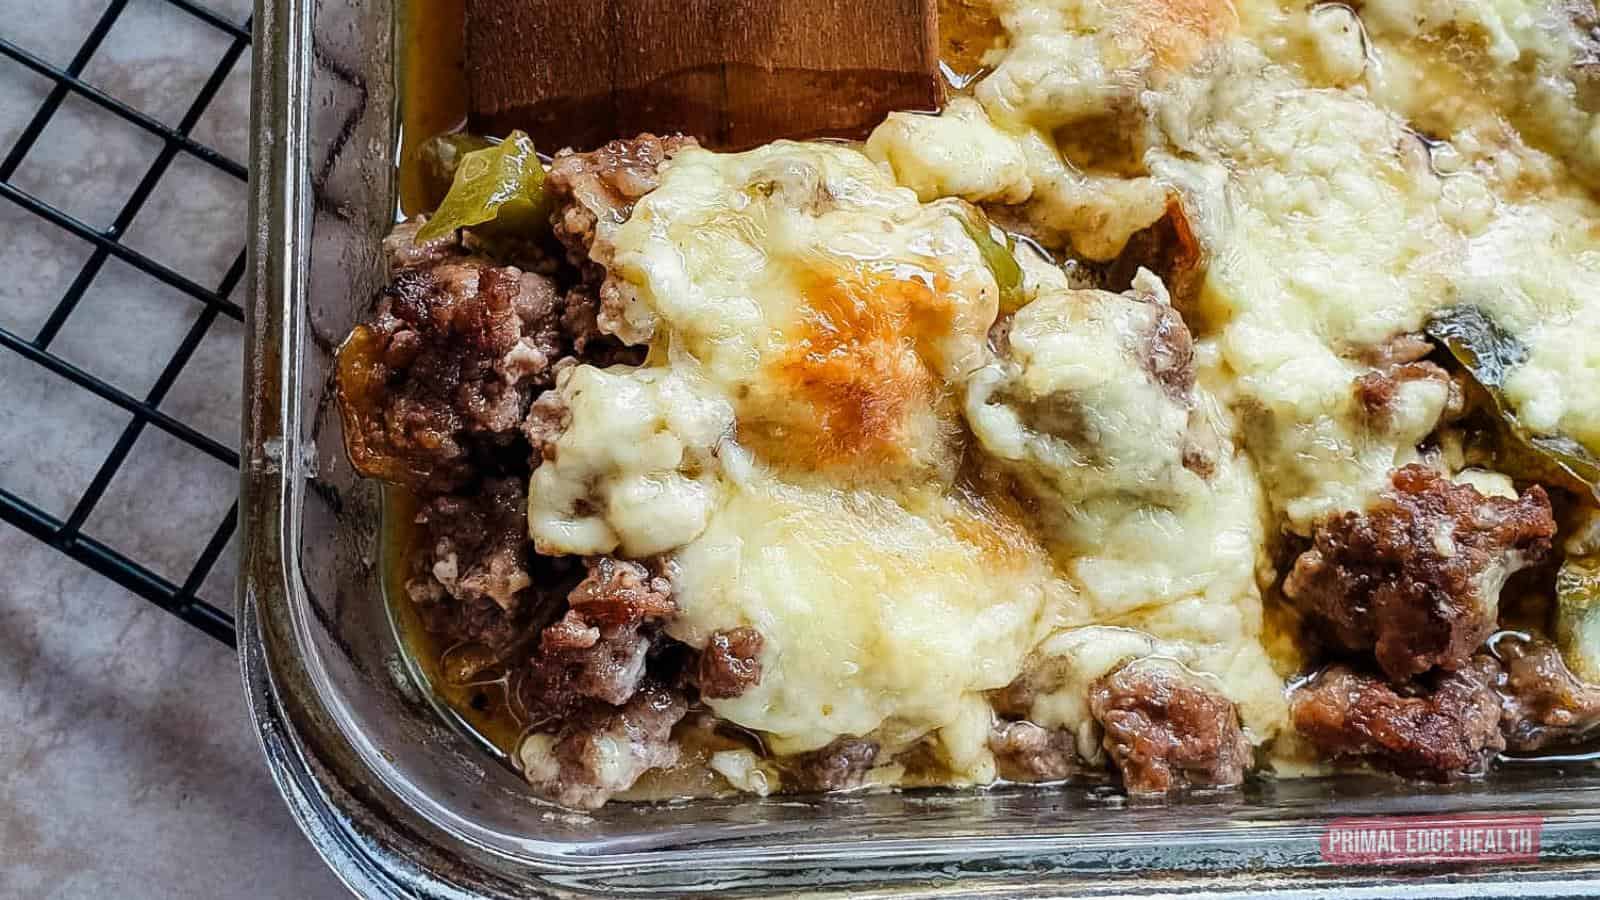 <p>Indulge in the iconic flavors of a Philly cheesesteak with this easy and quick casserole. Packed with tender beef, green bell peppers, and melted cheese, this dish is a delicious twist on a classic favorite.<br><strong>Get the Recipe: </strong><a href="https://www.primaledgehealth.com/keto-philly-cheesesteak-casserole/?utm_source=msn&utm_medium=page&utm_campaign=msn">Philly Cheesesteak Casserole</a></p>